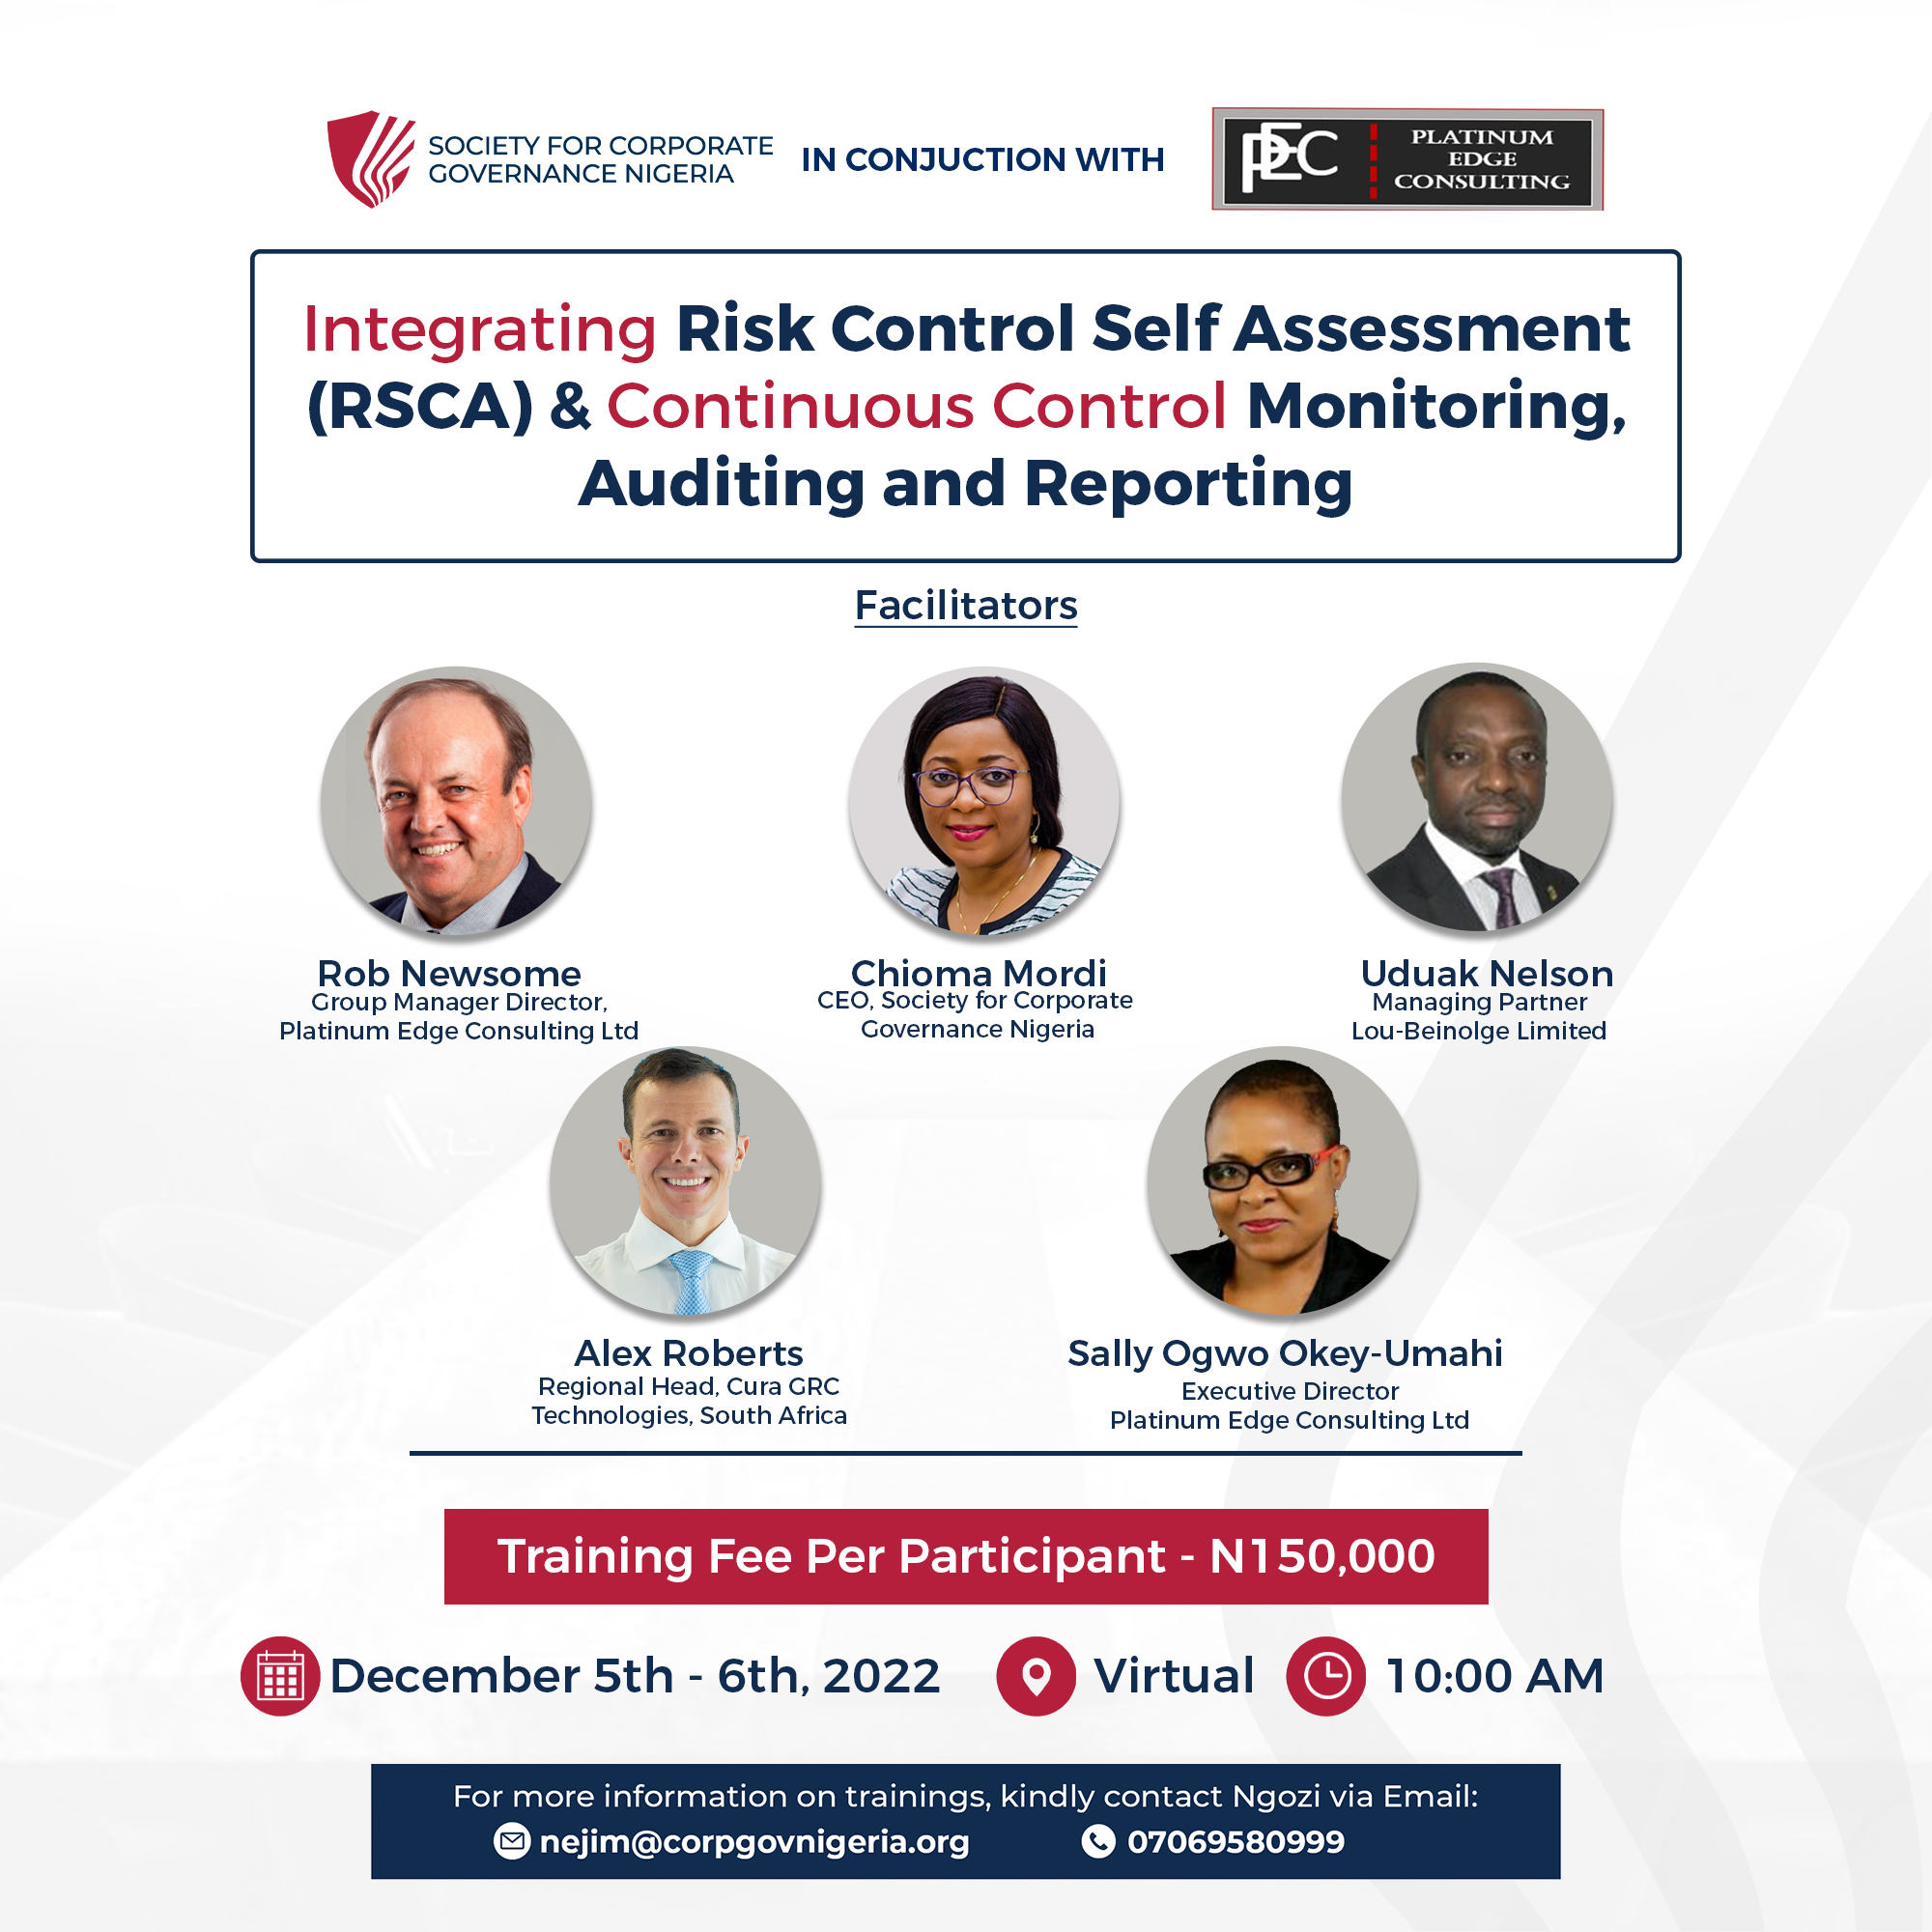 Integrating Risk Control Self-Assessment (RCSA) & Continuous Control Monitoring, Auditing & Reporting